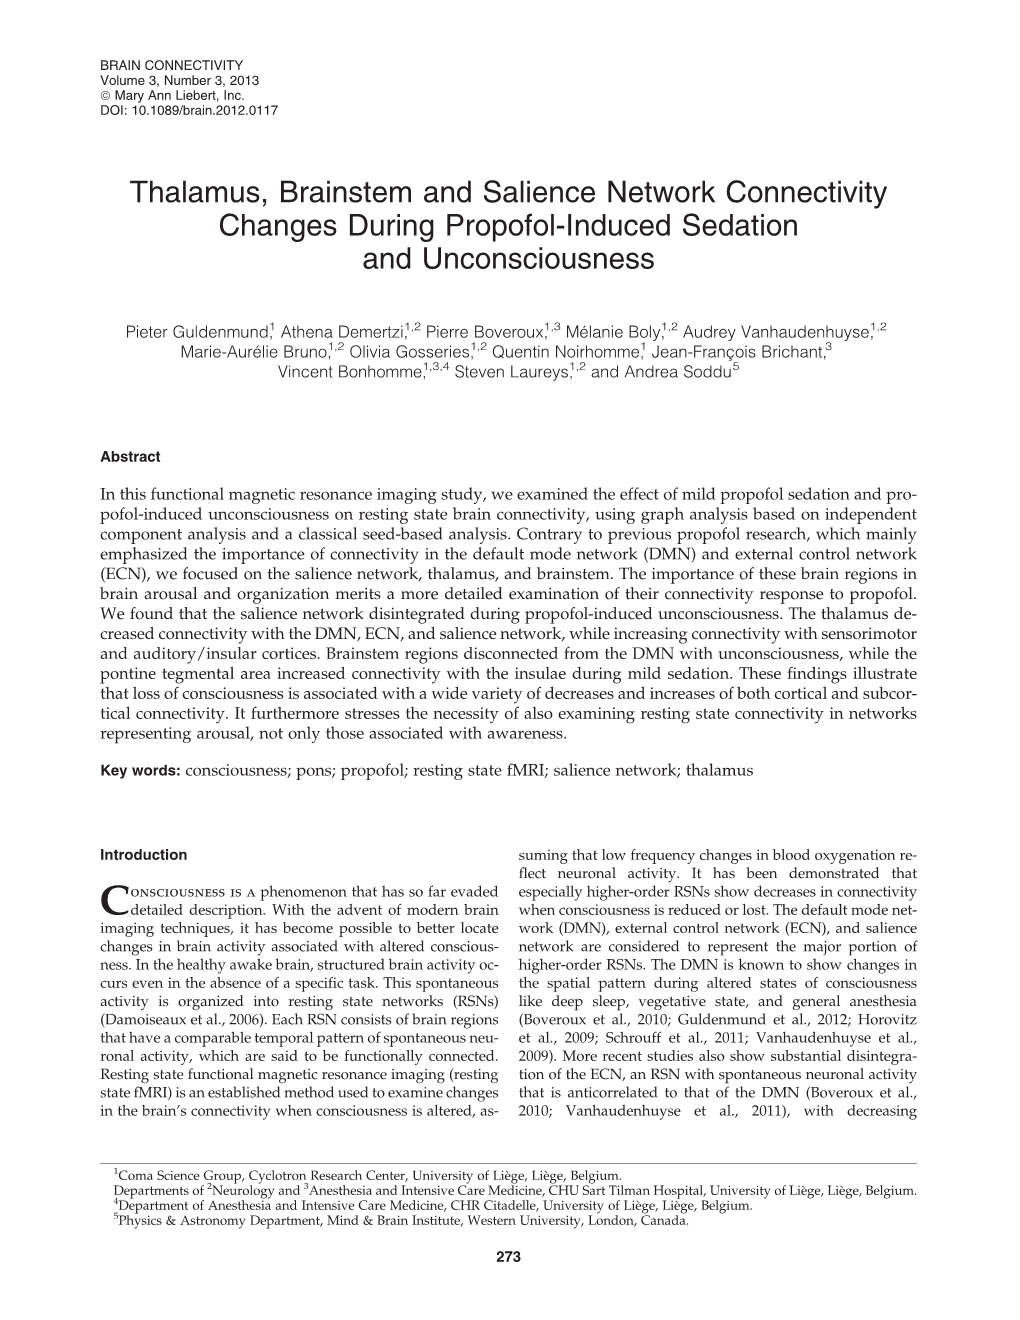 Thalamus, Brainstem and Salience Network Connectivity Changes During Propofol-Induced Sedation and Unconsciousness